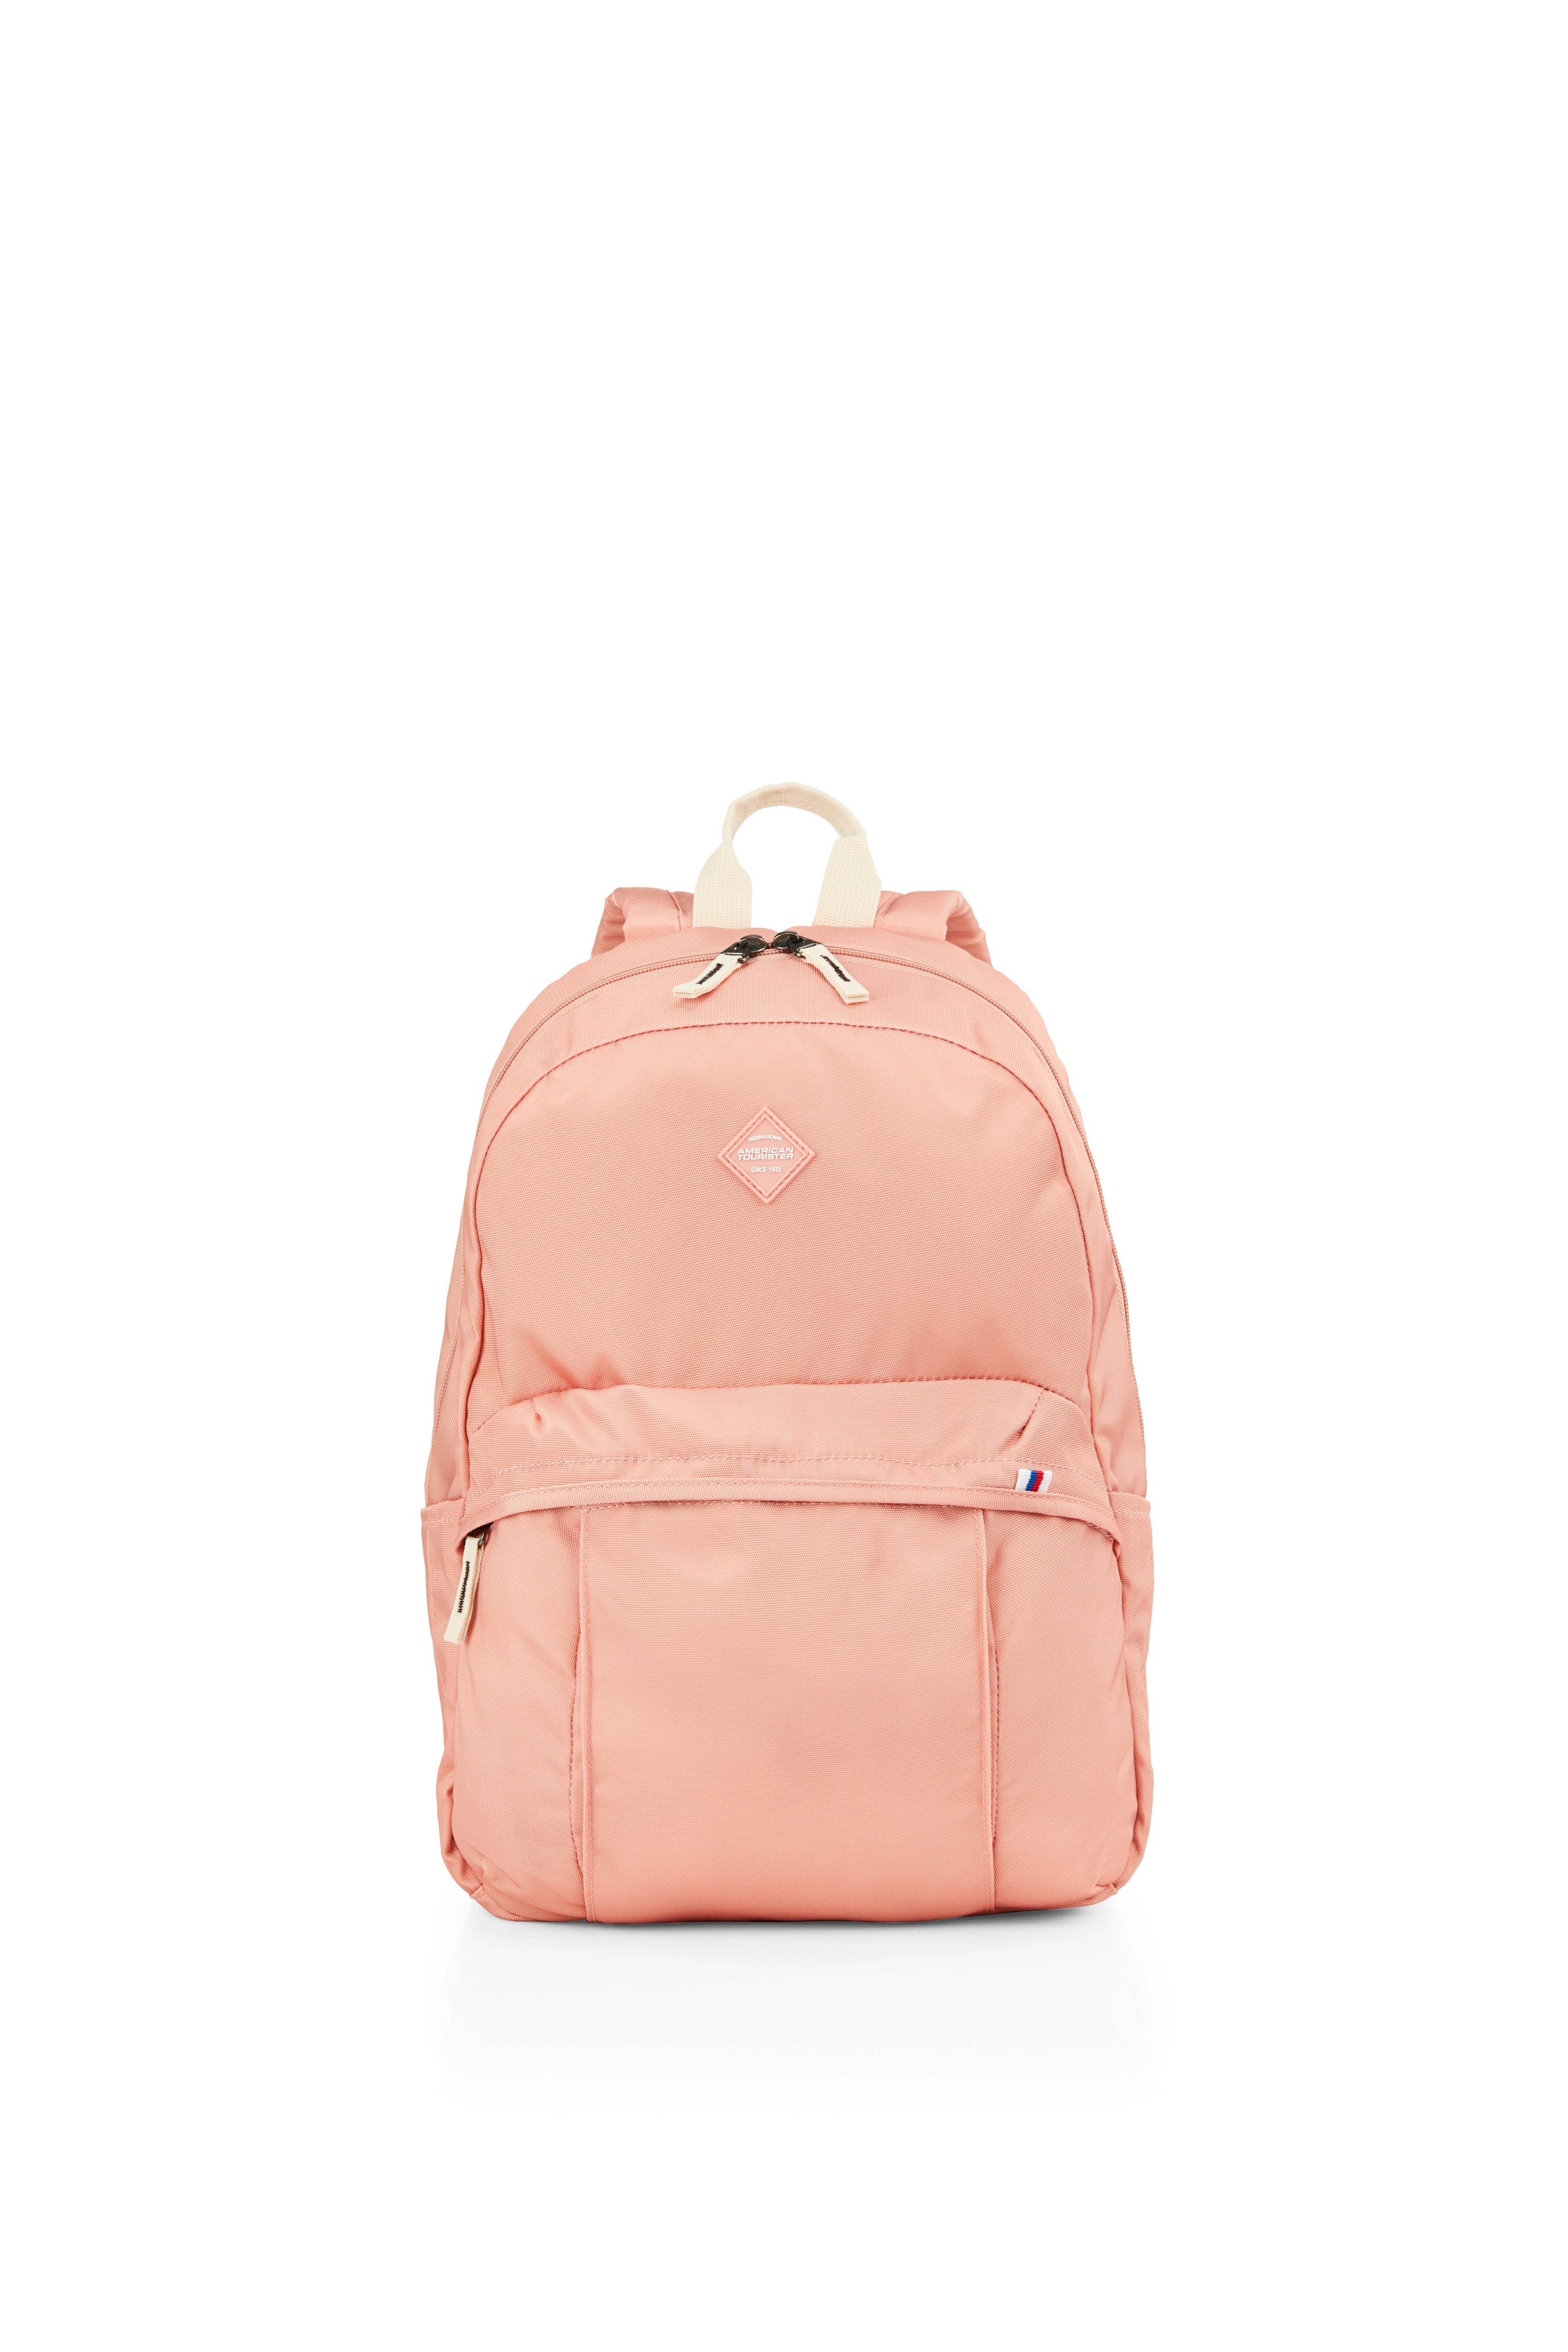 American Tourister - RUDY Small Fashion Backpack - Apricot Ice - 0